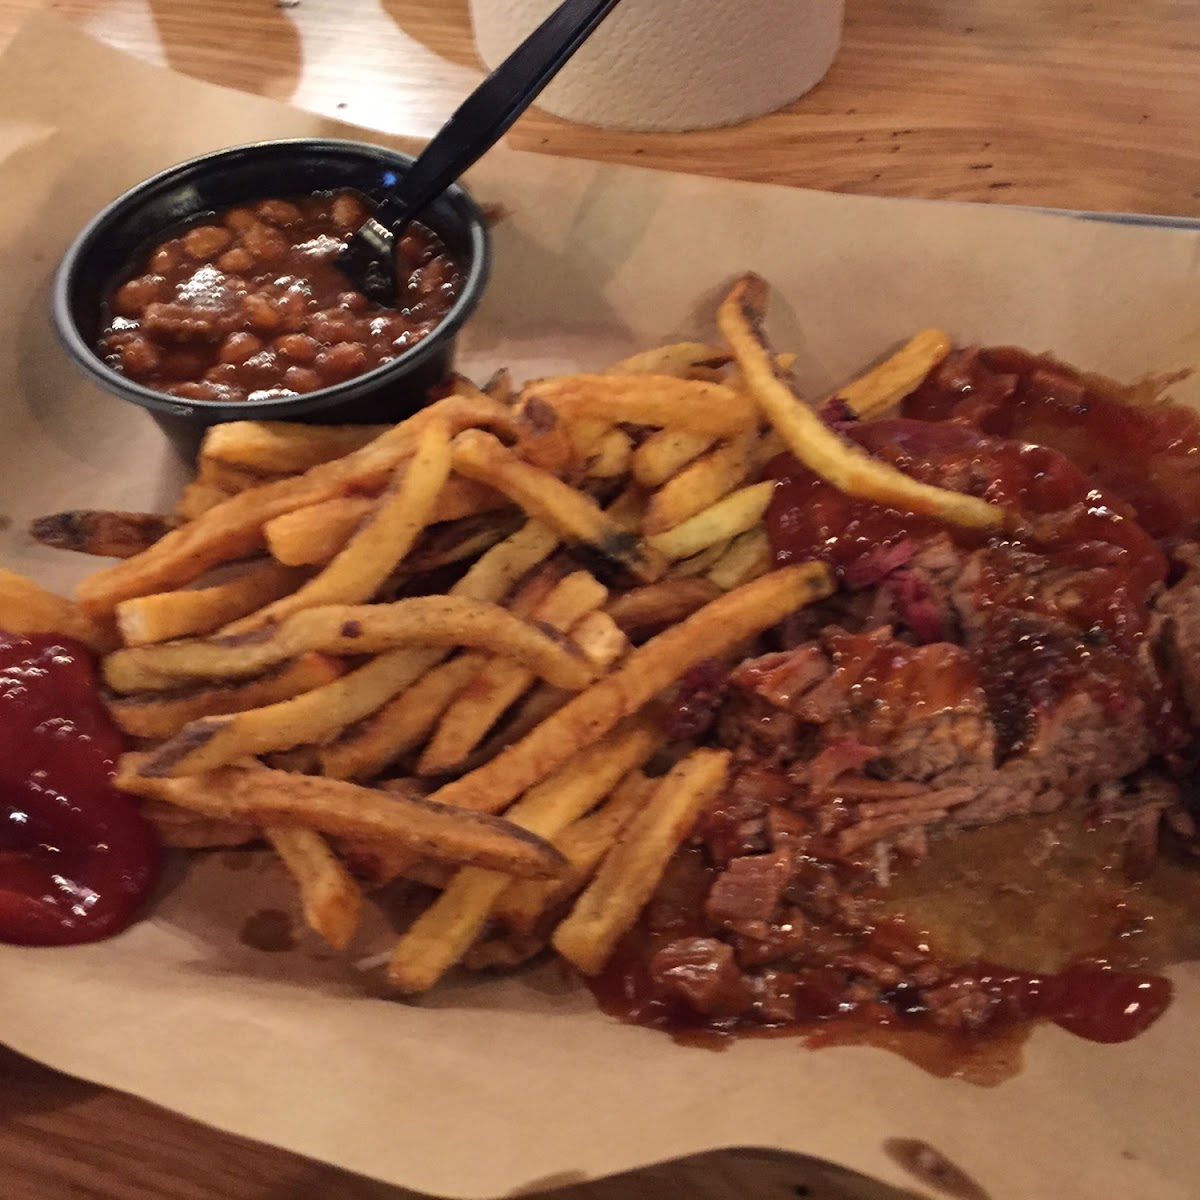 Fries, bbq beans and smoked brisket. Delish?